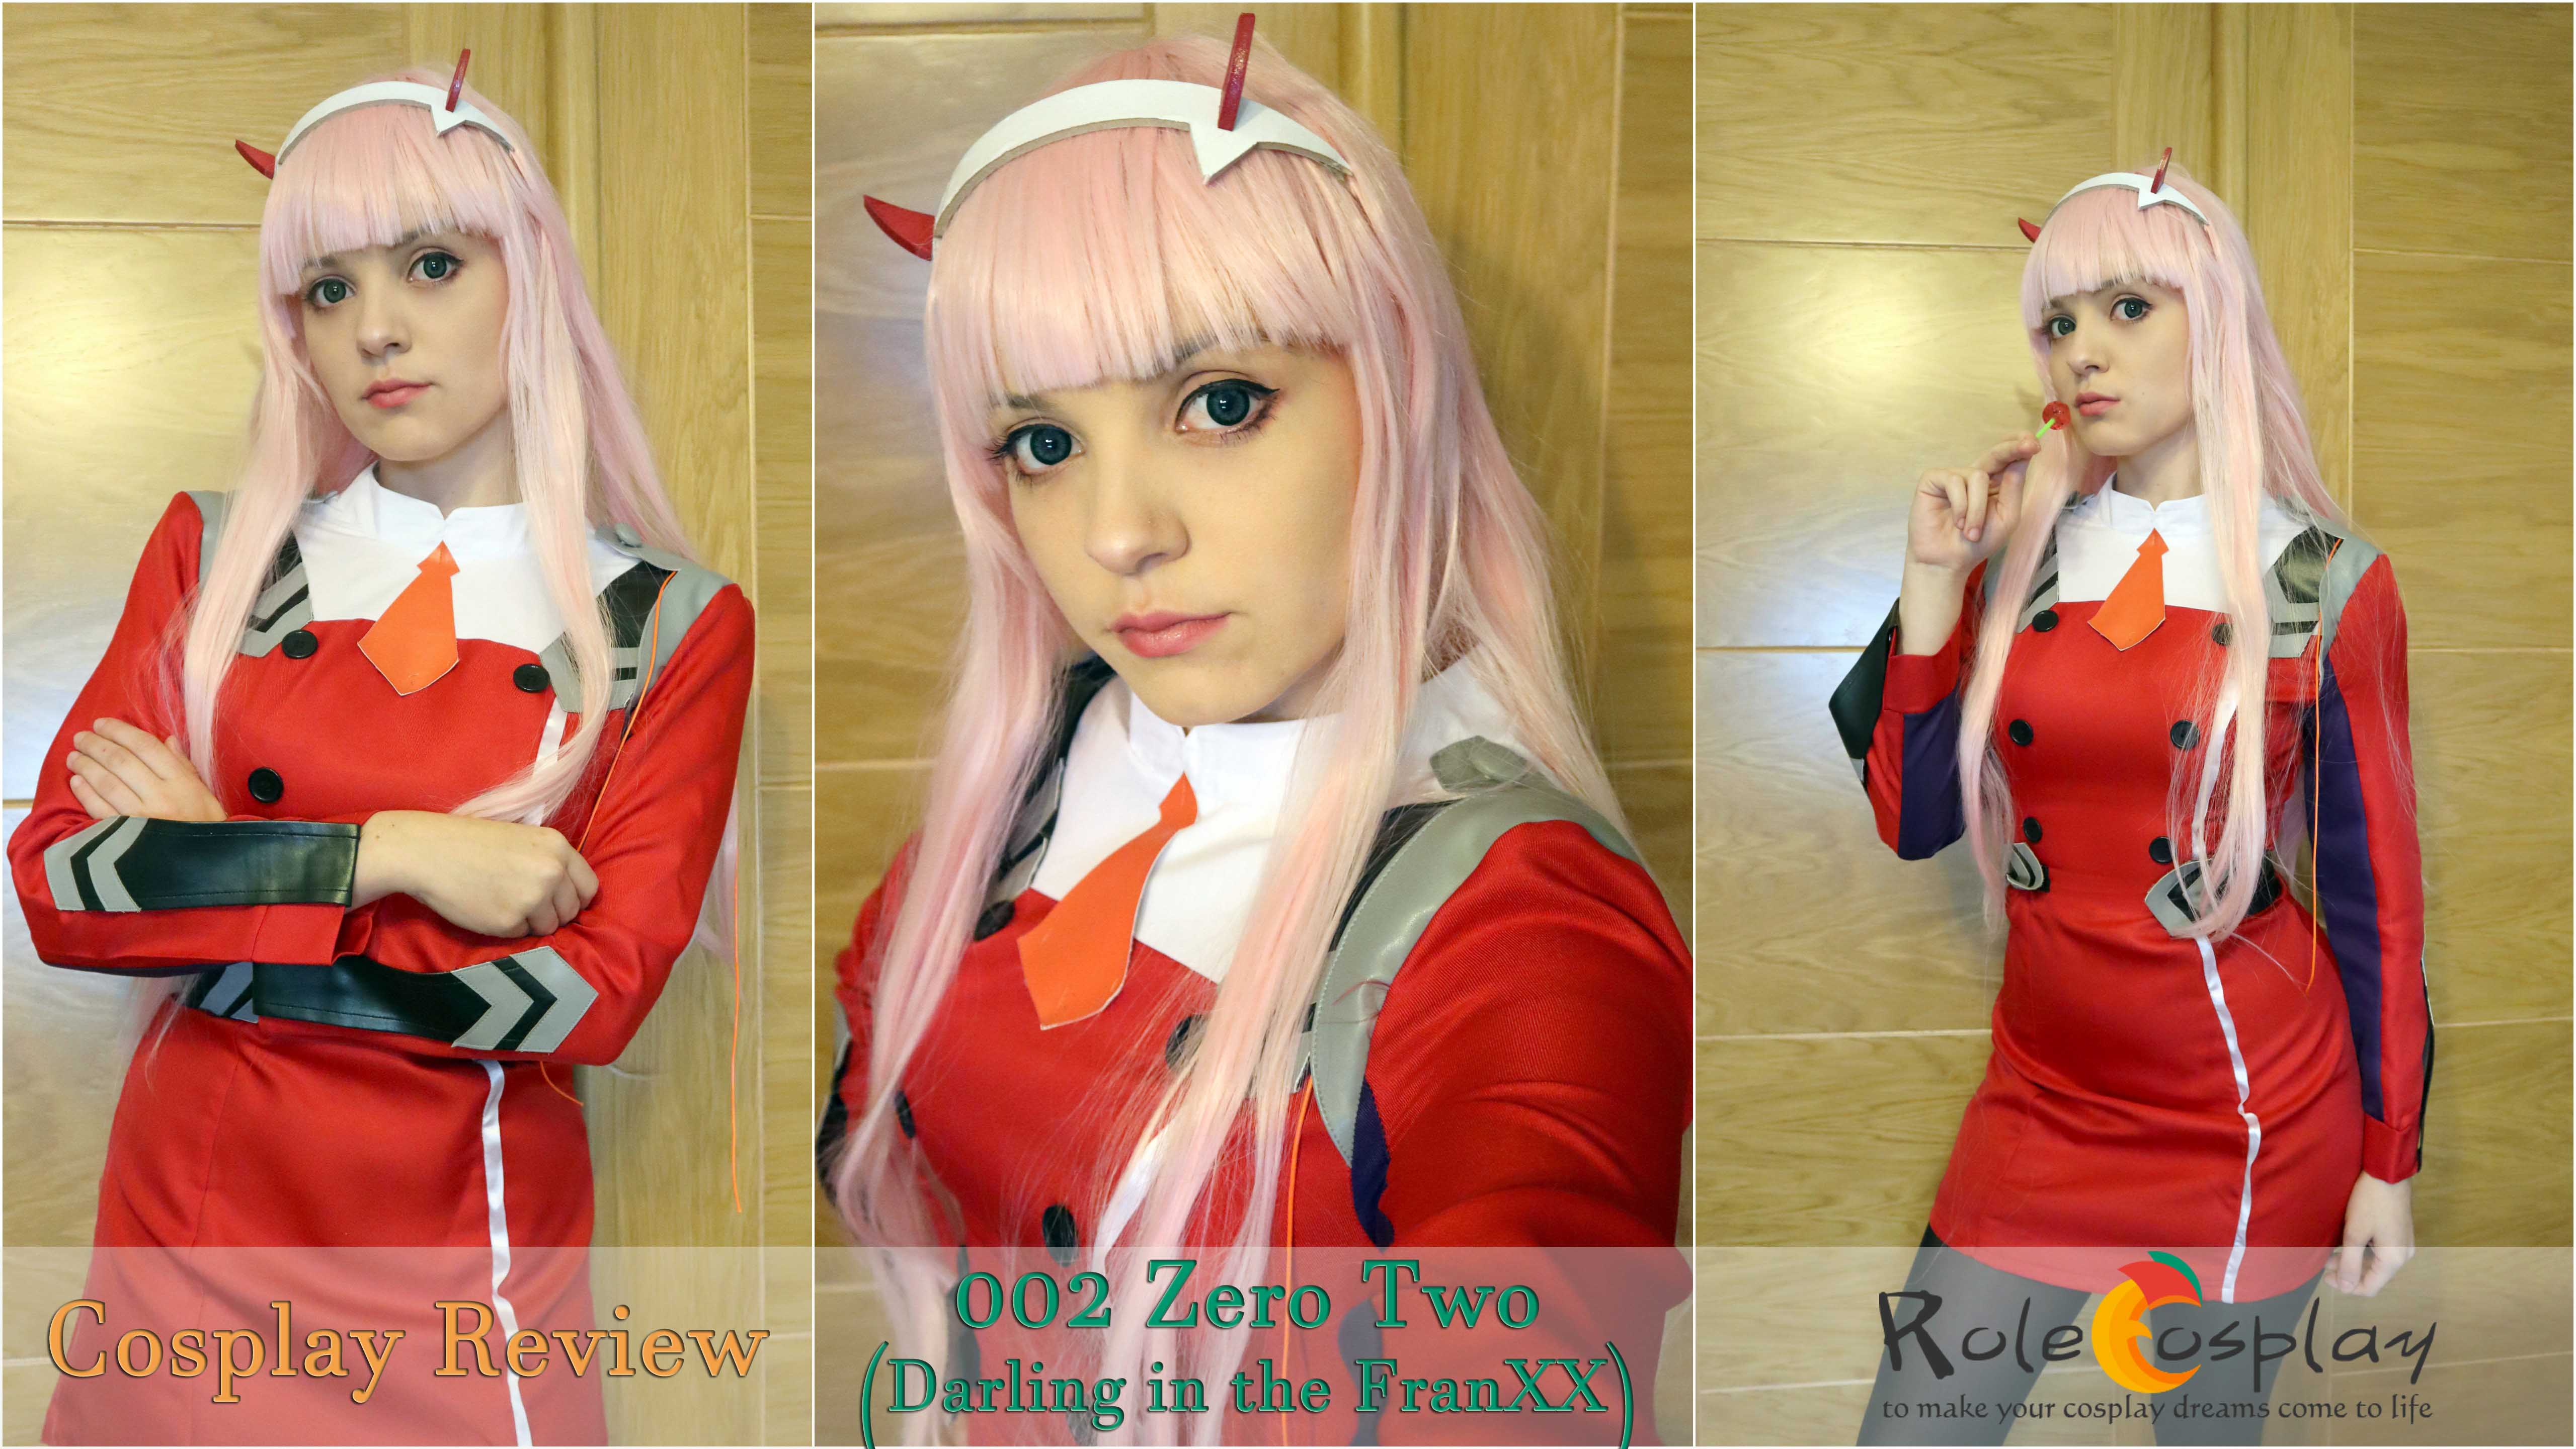 Cosplay Review: Zero Two (Darling in the FranXX) from Rolecosplay